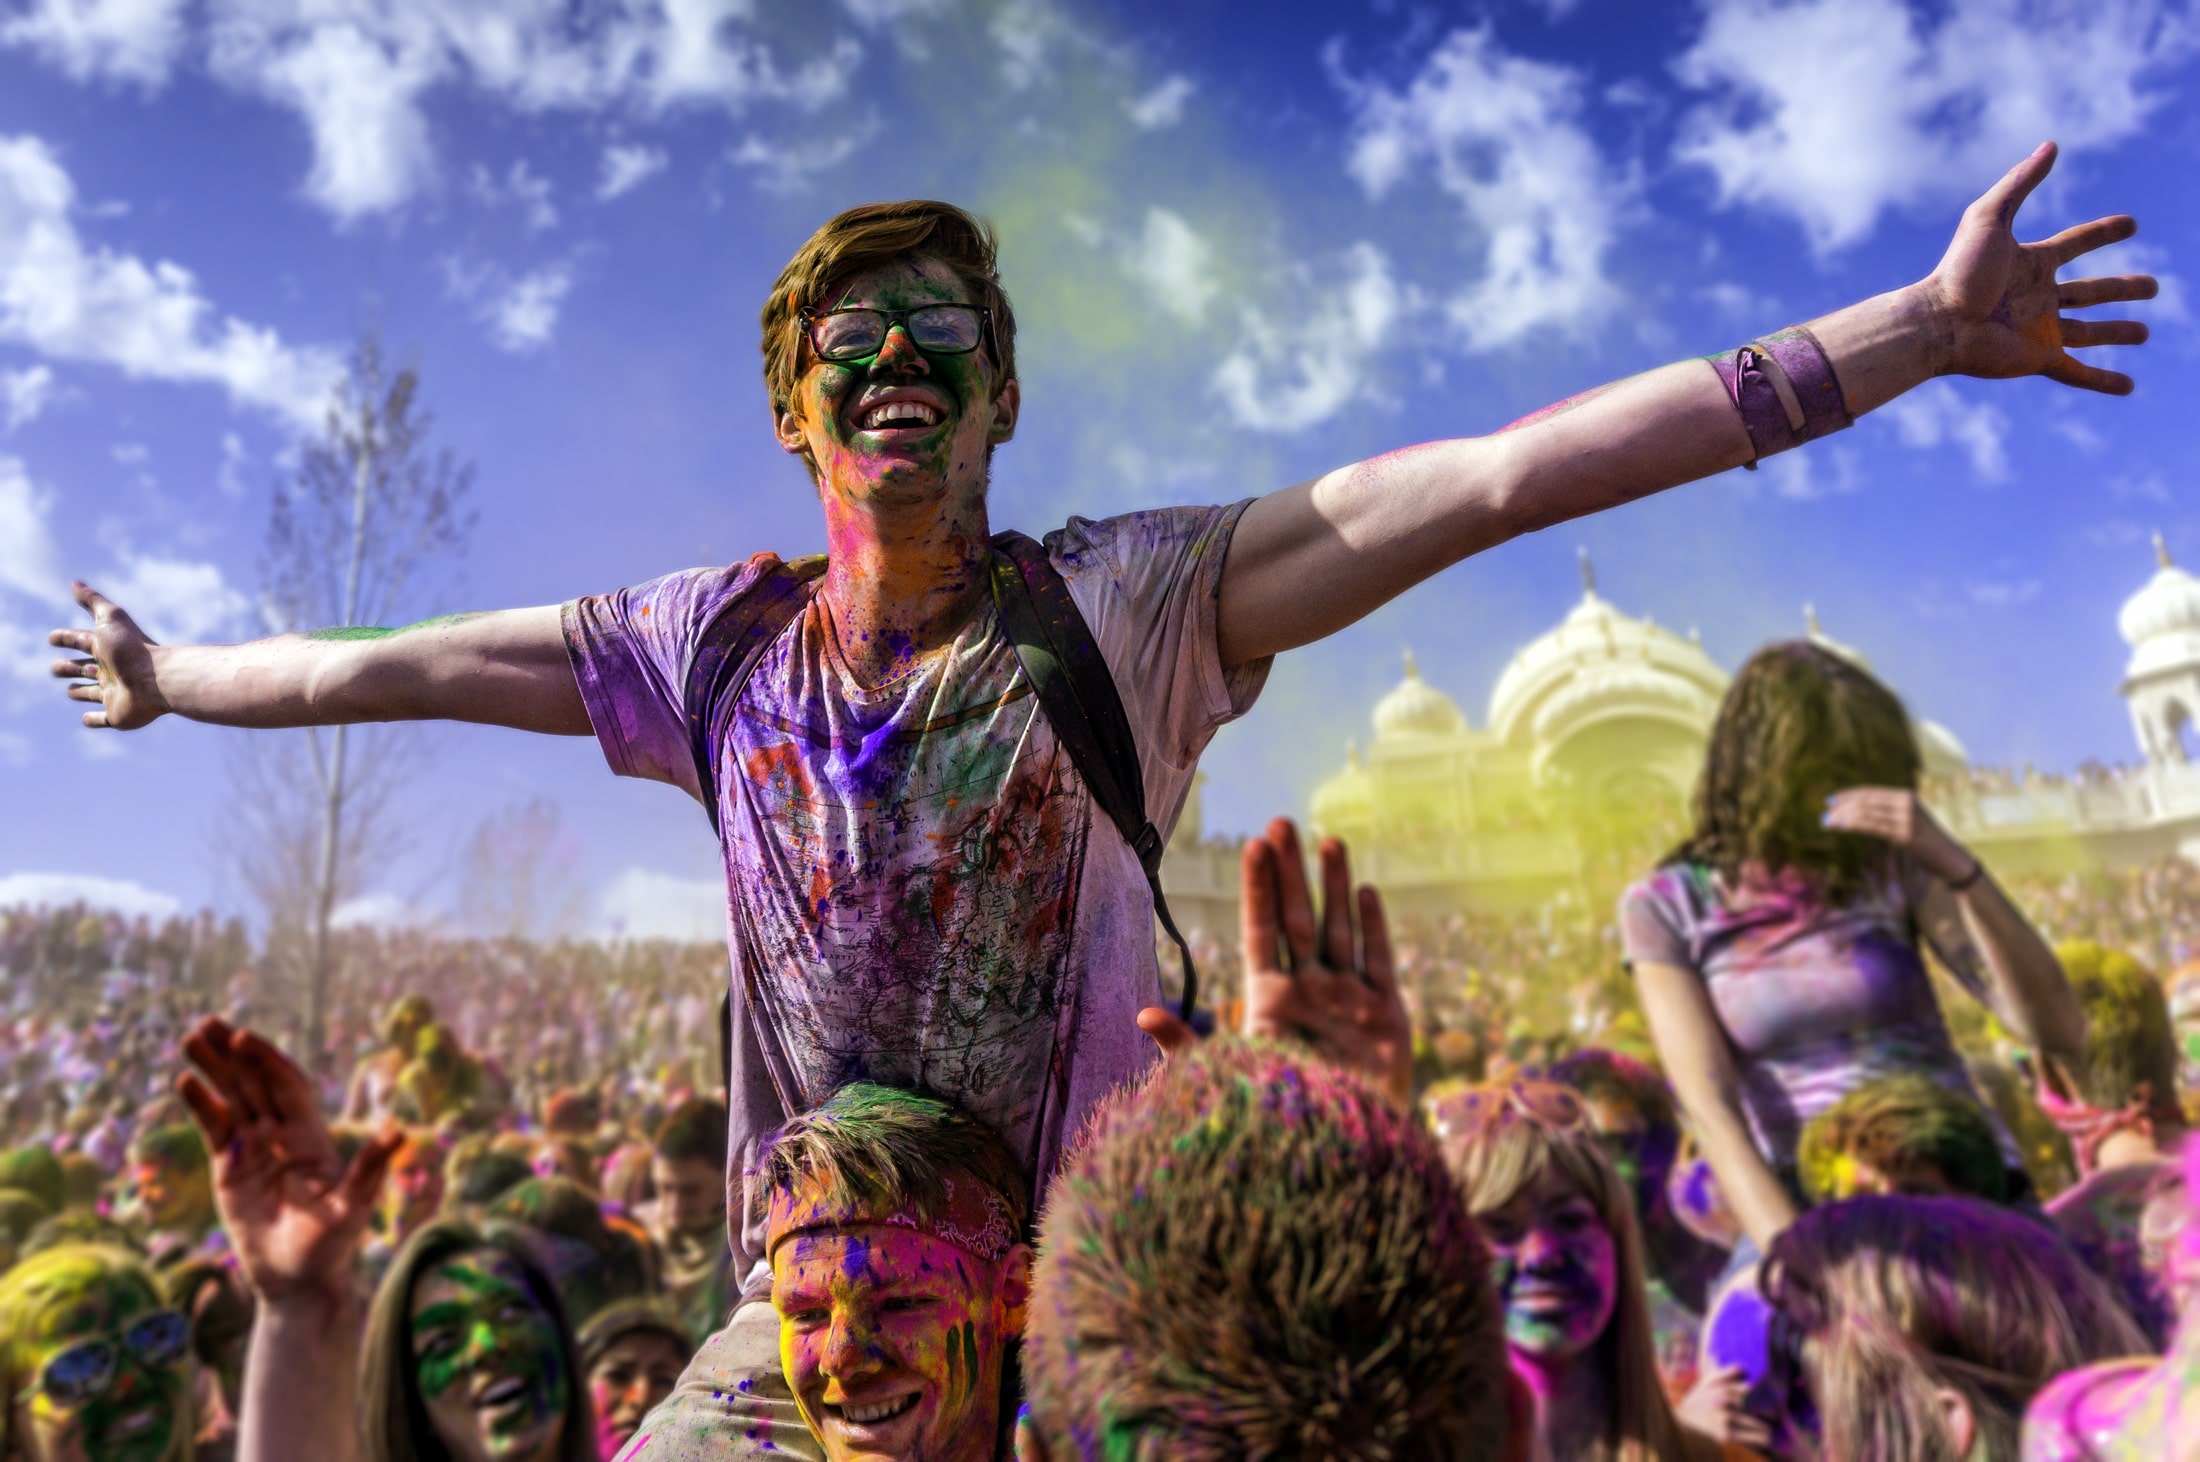 Holi Festival - 8 Festivals From Around The World To Add To Your Bucket List